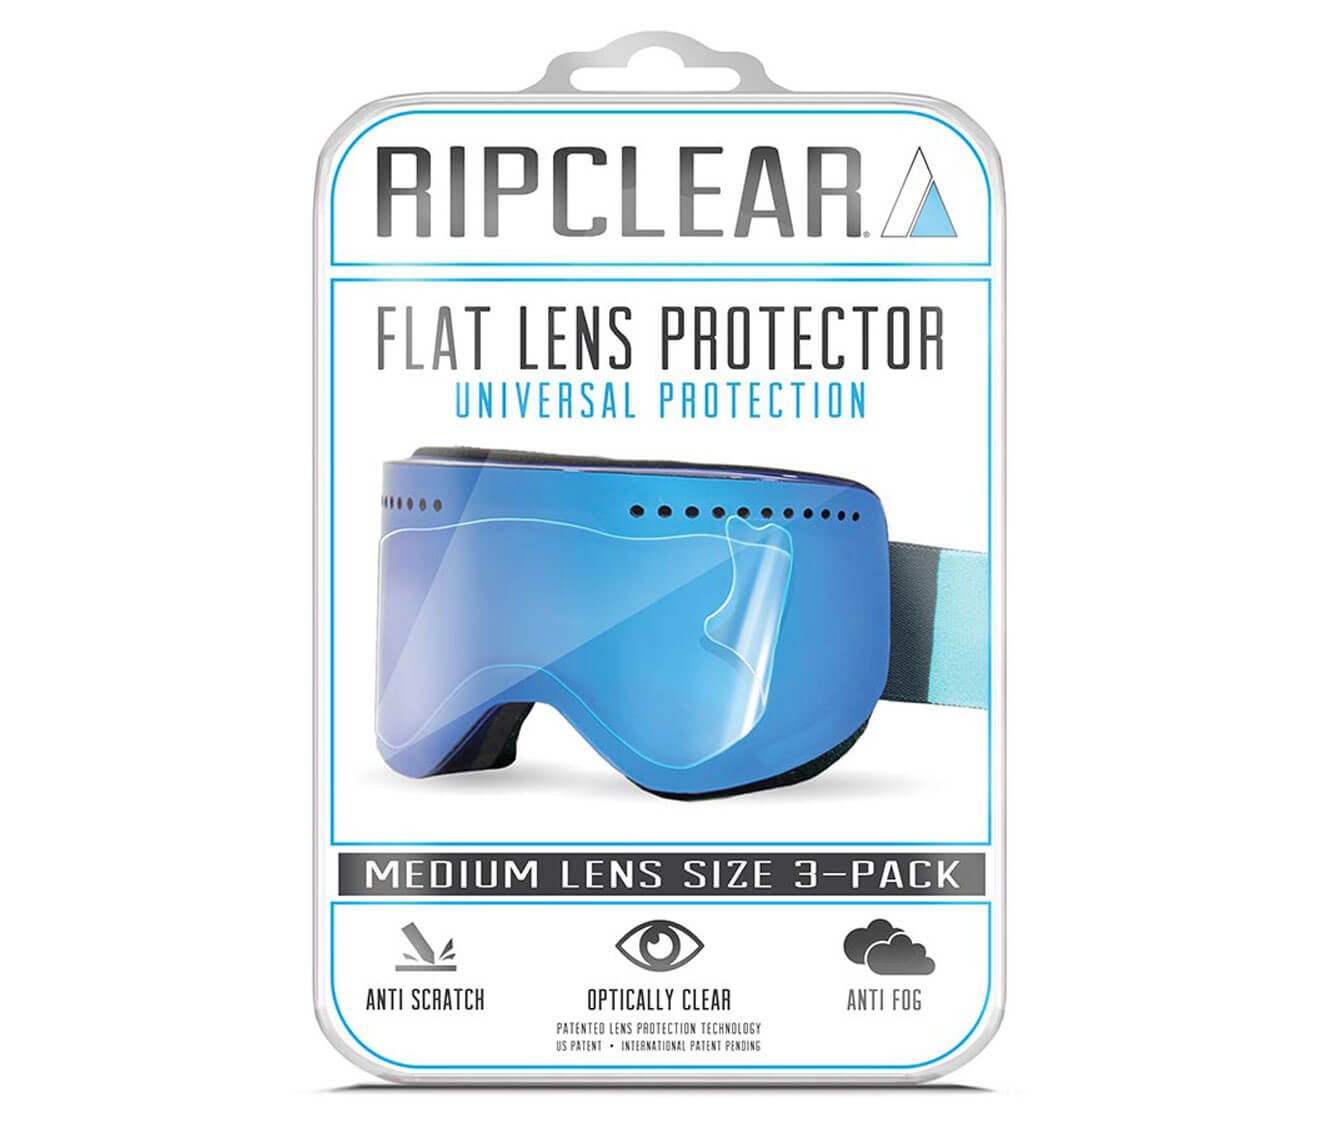 Ripclear Cylindrical Medium Universal Snow Goggle Flat Lens Protector - 3 Pack